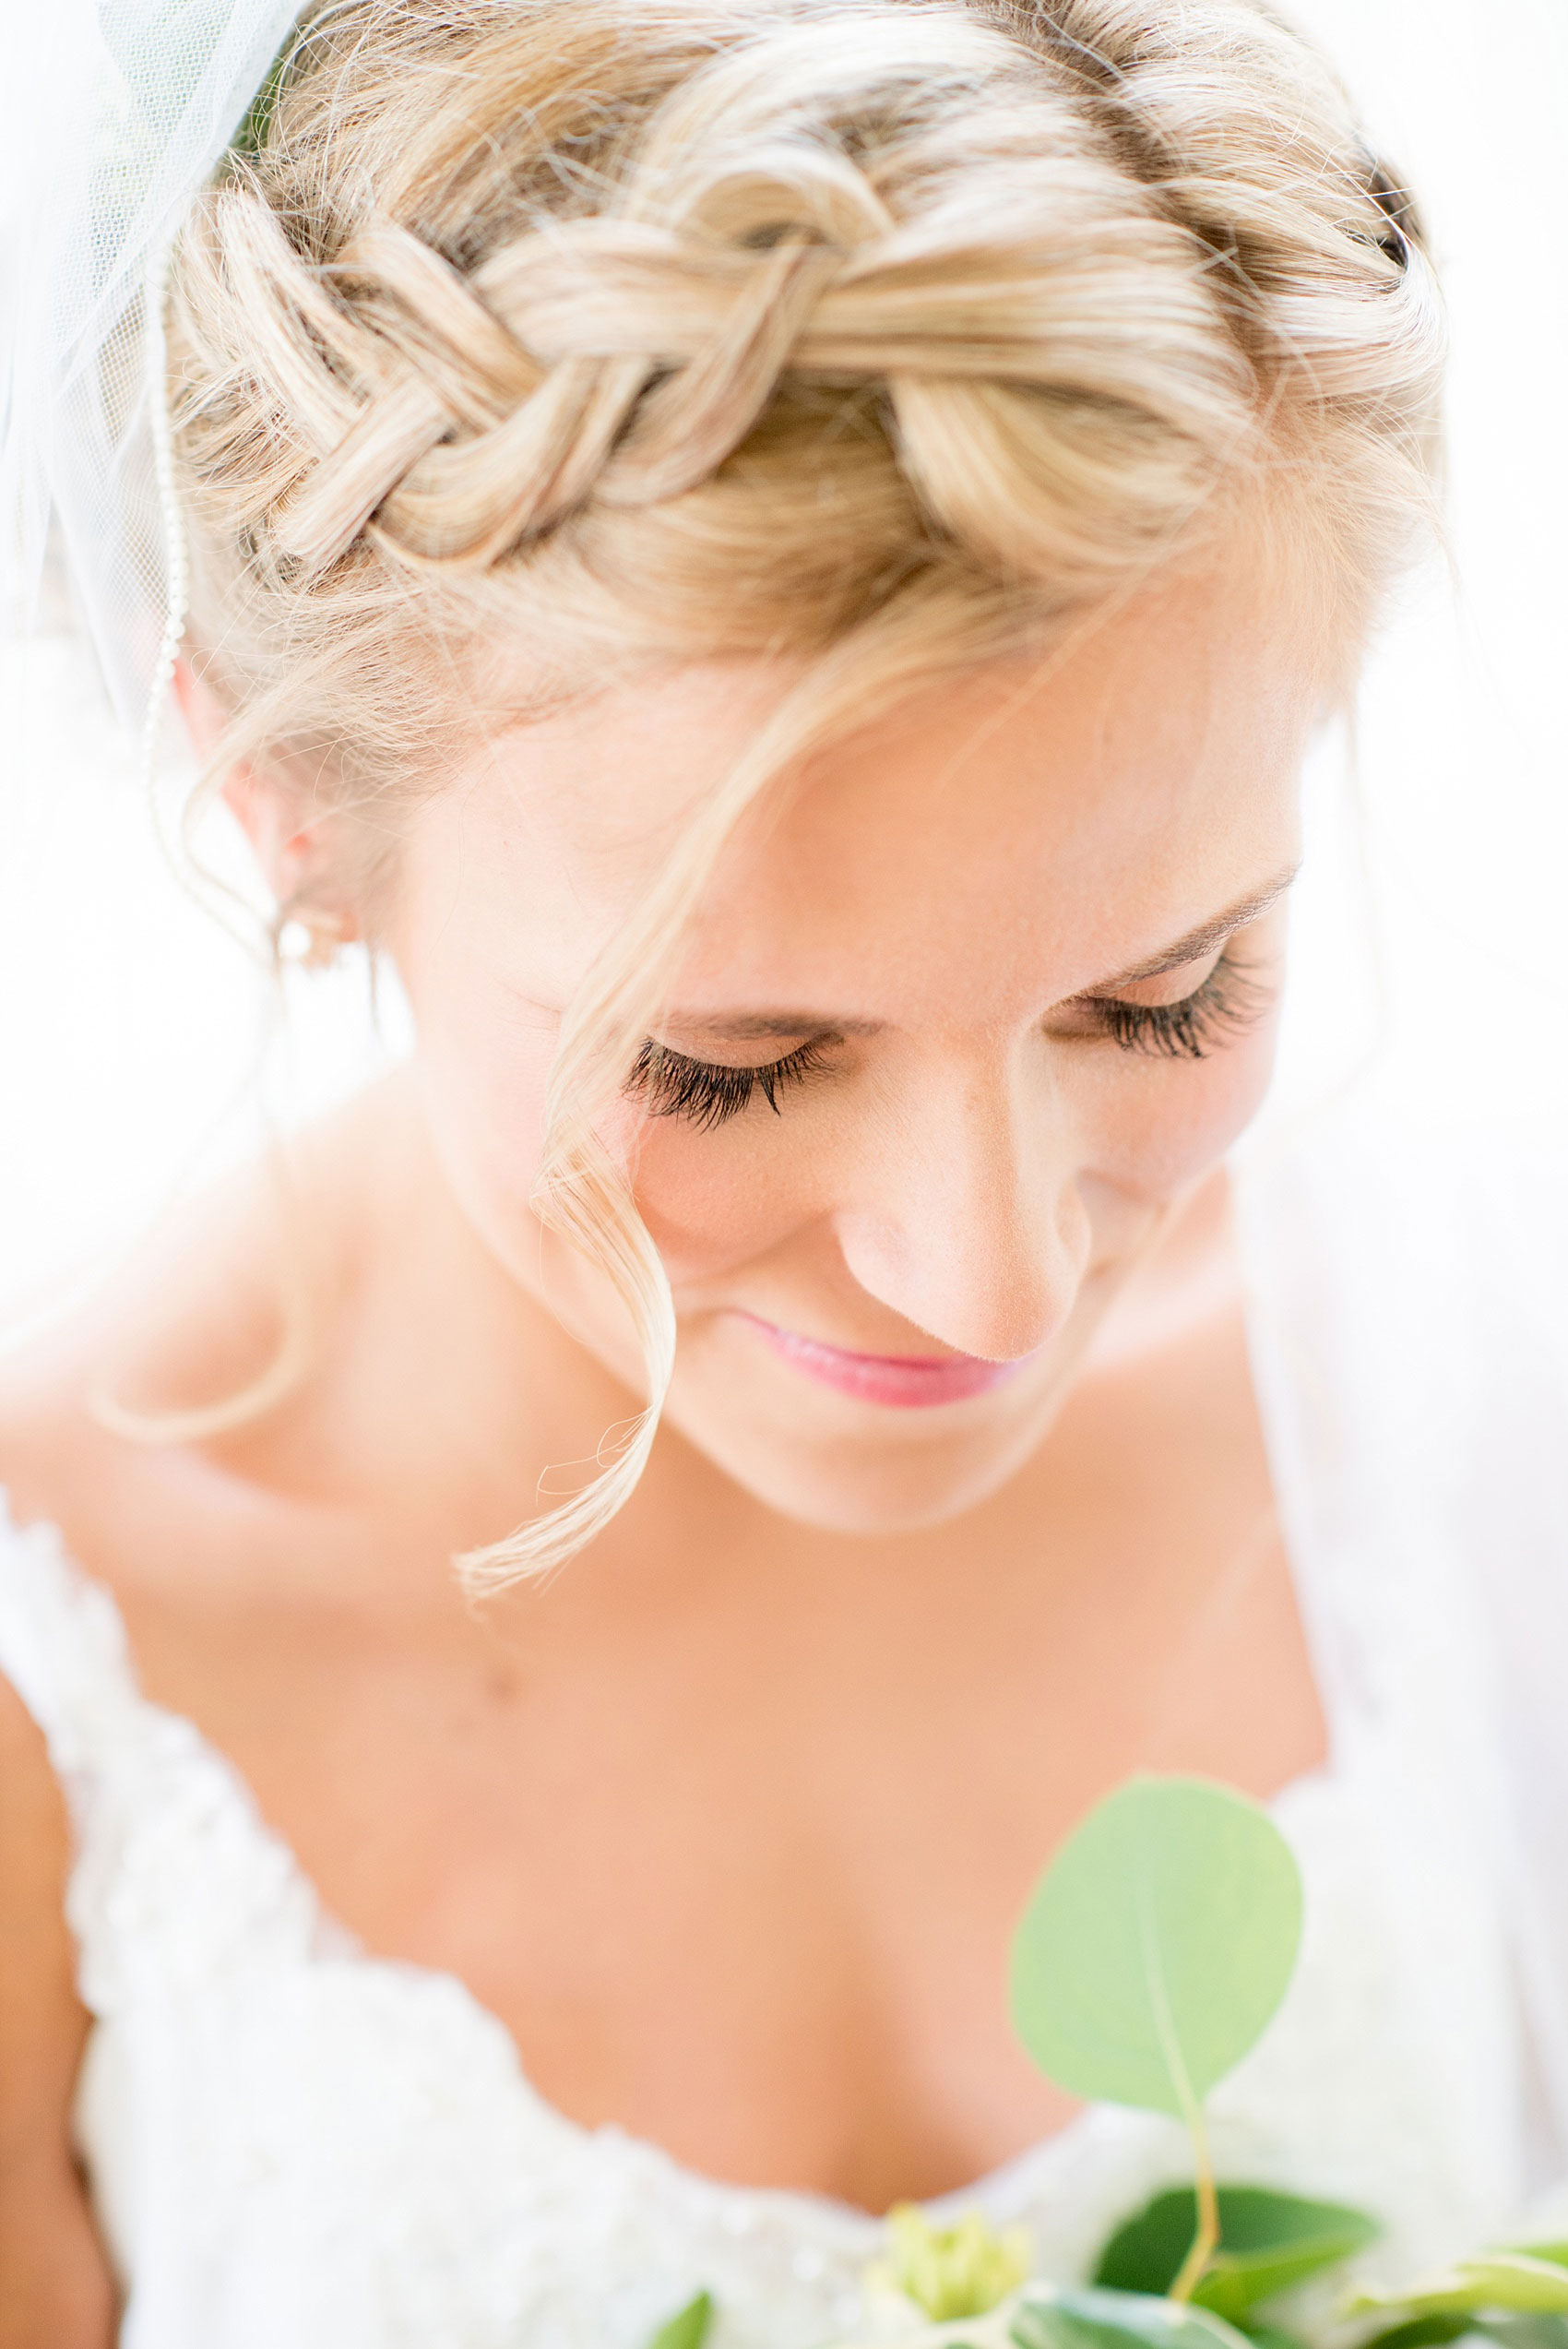 Mikkel Paige Photography wedding photos at The Merrimon-Wynne House in downtown Raleigh. A close up bridal portrait with full lashes and reverse-braid, crown hair up-do.